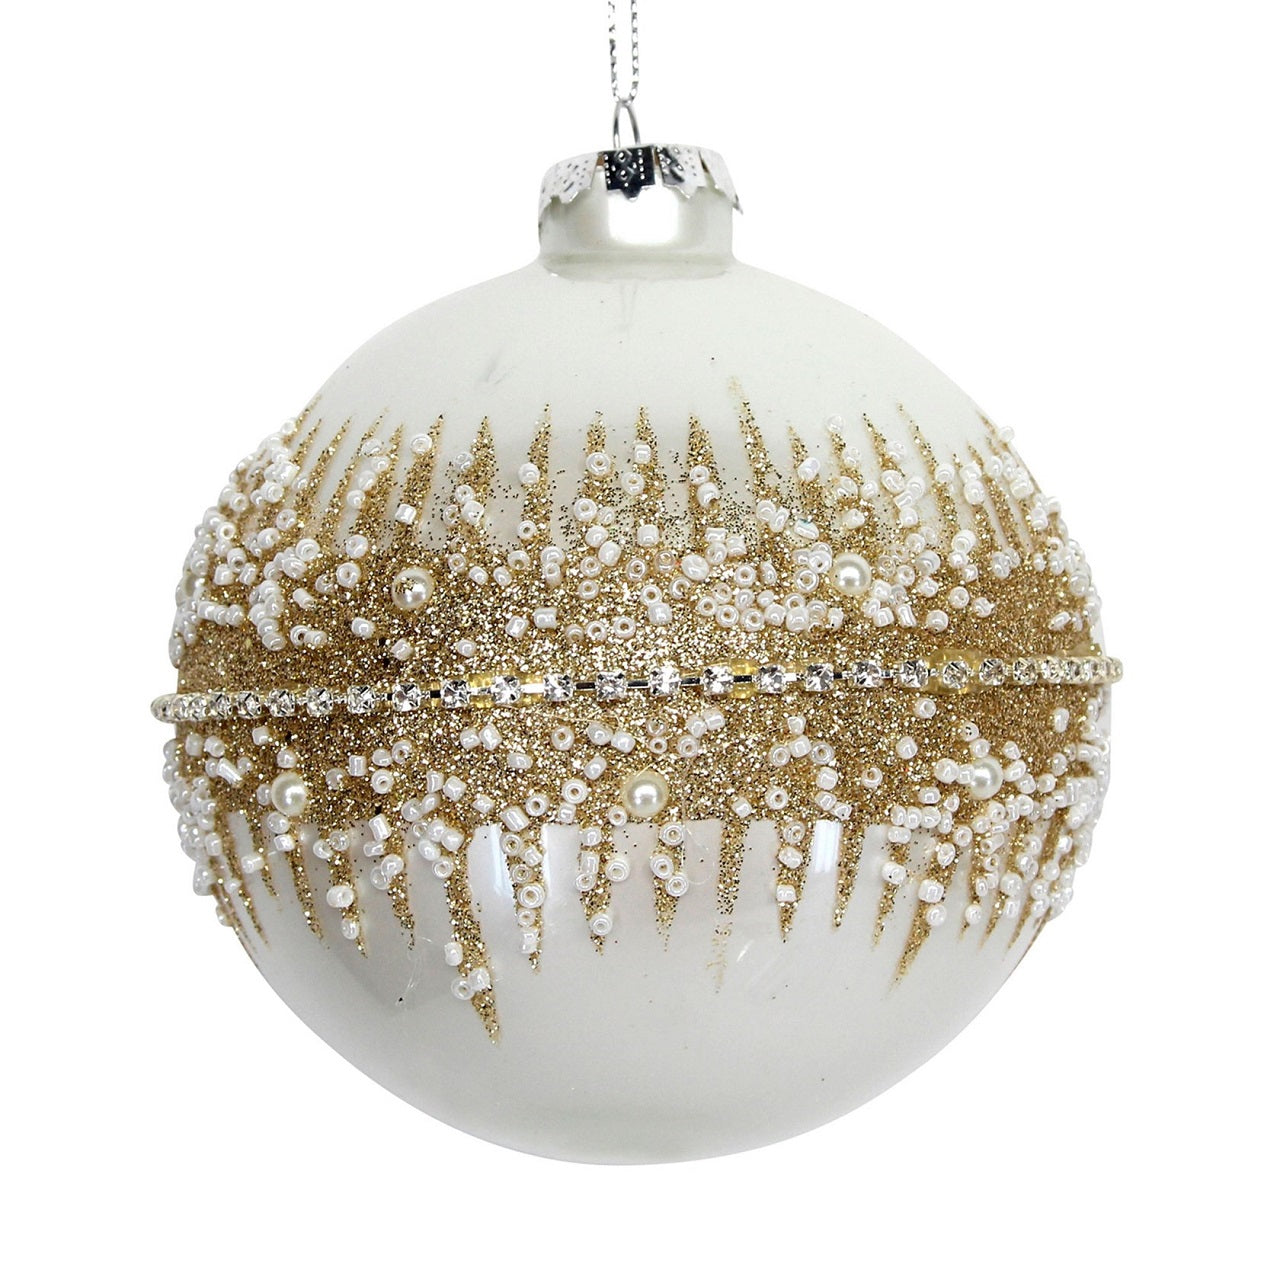 Gisela Graham Christmas Bauble White With Gold Glitter Spikey Band  Browse our beautiful range of luxury Christmas tree decorations, baubles & ornaments for your tree this Christmas.  Add style to your Christmas tree with these elegant Christmas white glass baubles decorated with glitter spikey band.